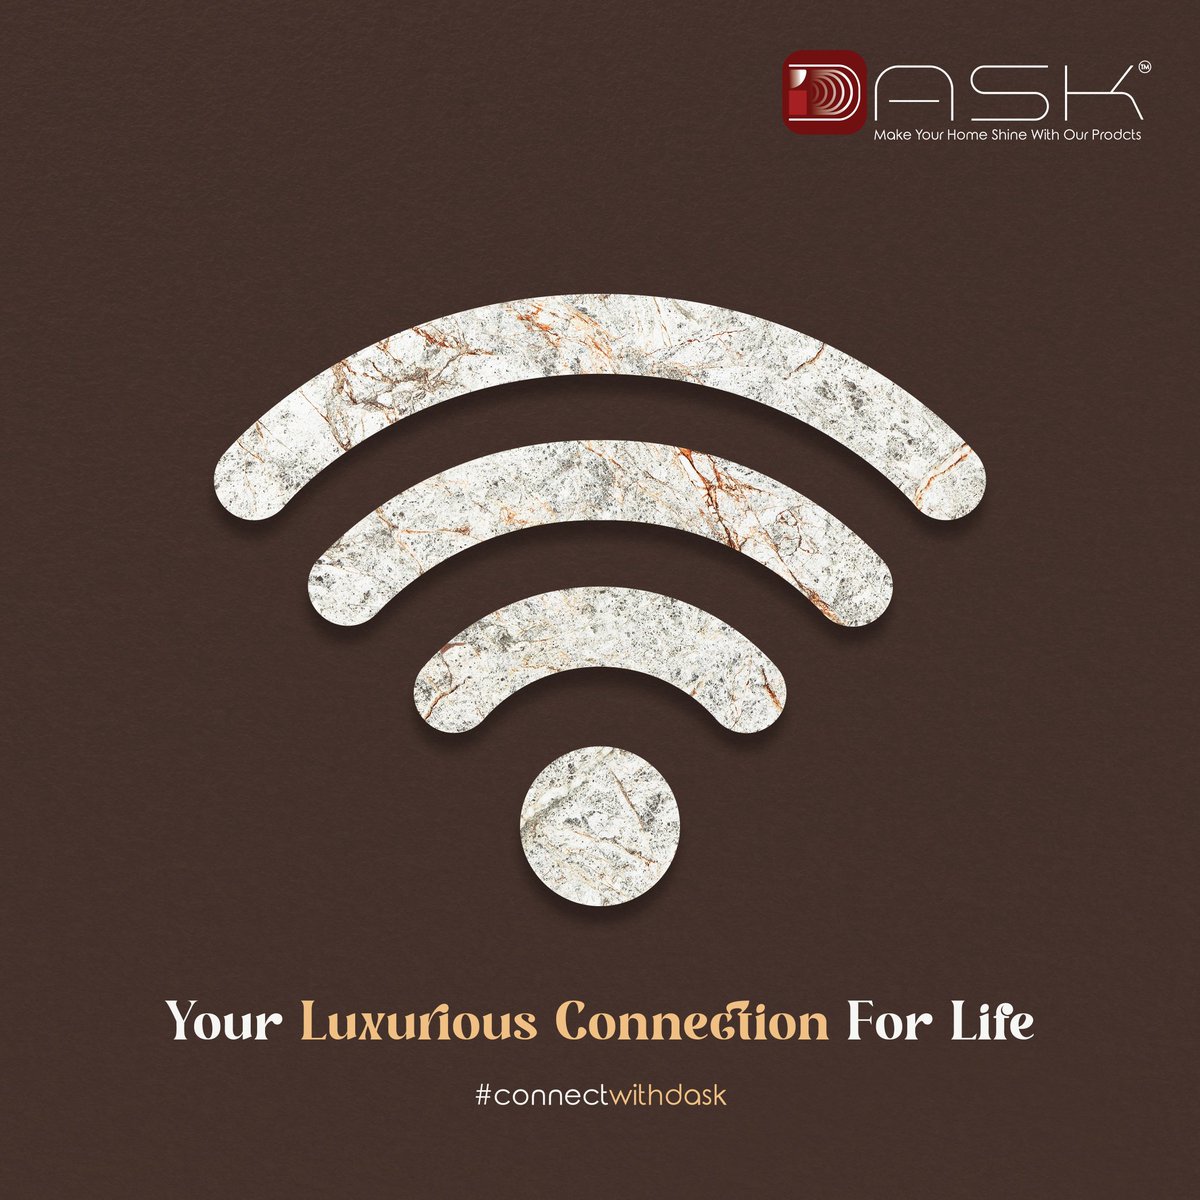 DASK Polygranite Sheets Offer You A Luxurious Living Space Connection.
.
.
Click Below to Follow Us on: 
FaceBook| Instagram| Linkdln| X.
👇
linktr.ee/daskpolygranit… 
.
.
#instadesign #homeinspo #modernliving #designlovers #homestyle #homedecoration  #dask #polygranitesheets